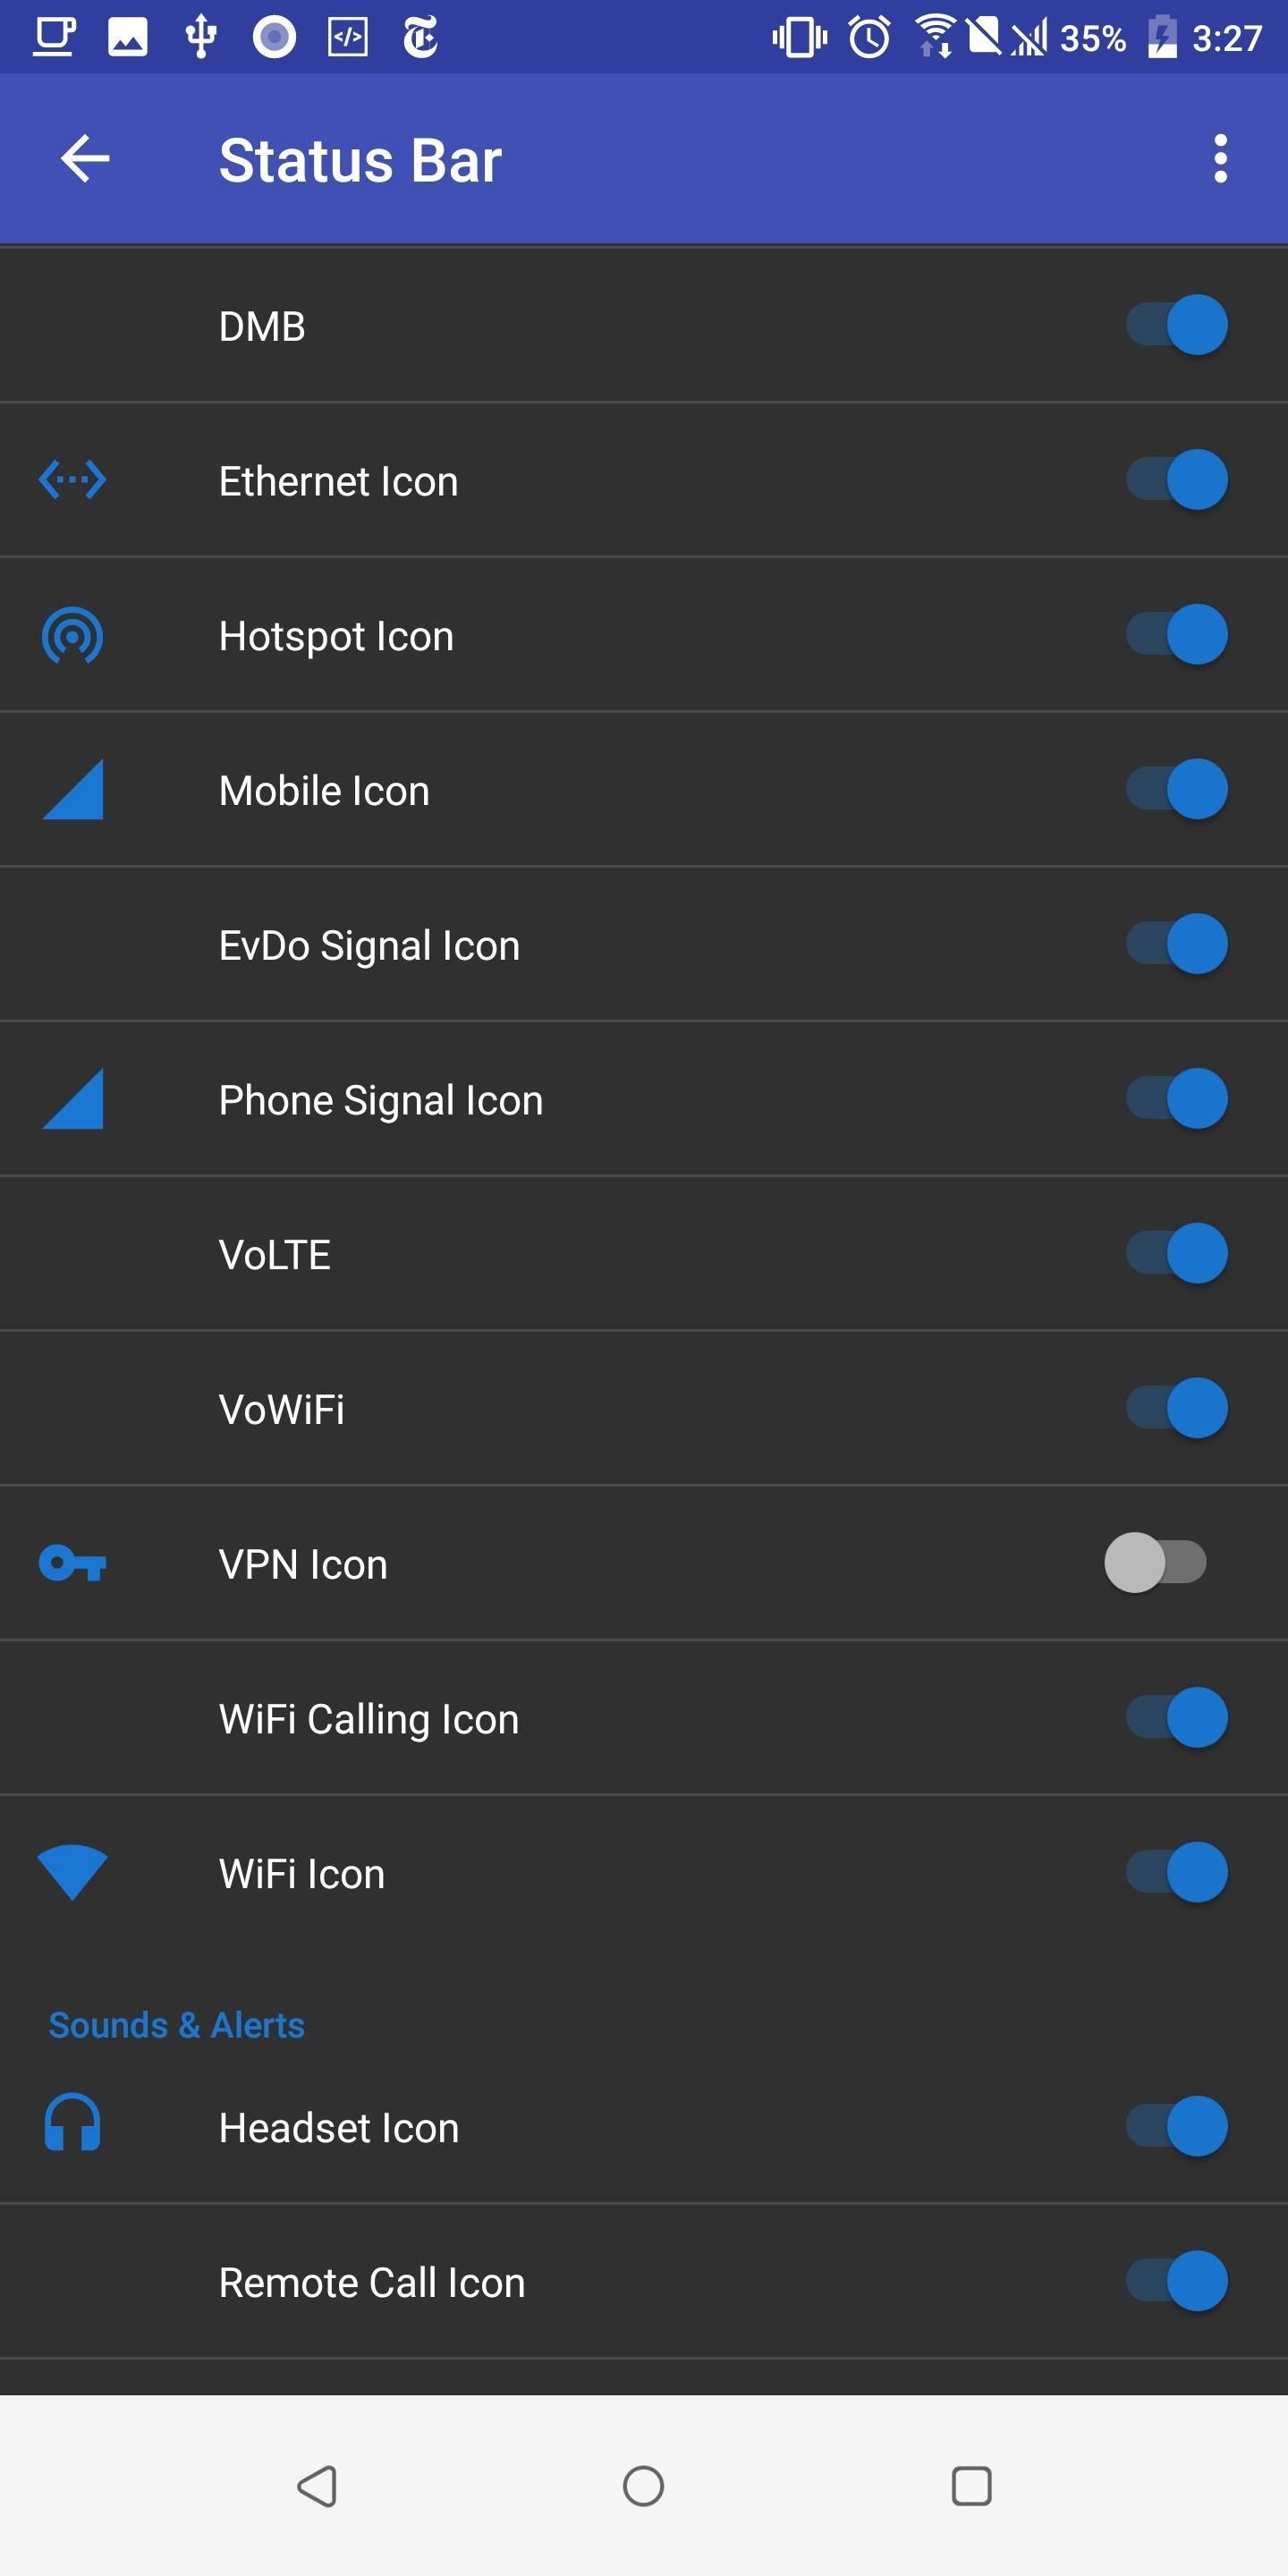 How to Hide the VPN 'Key' Icon on Android — No Root Needed